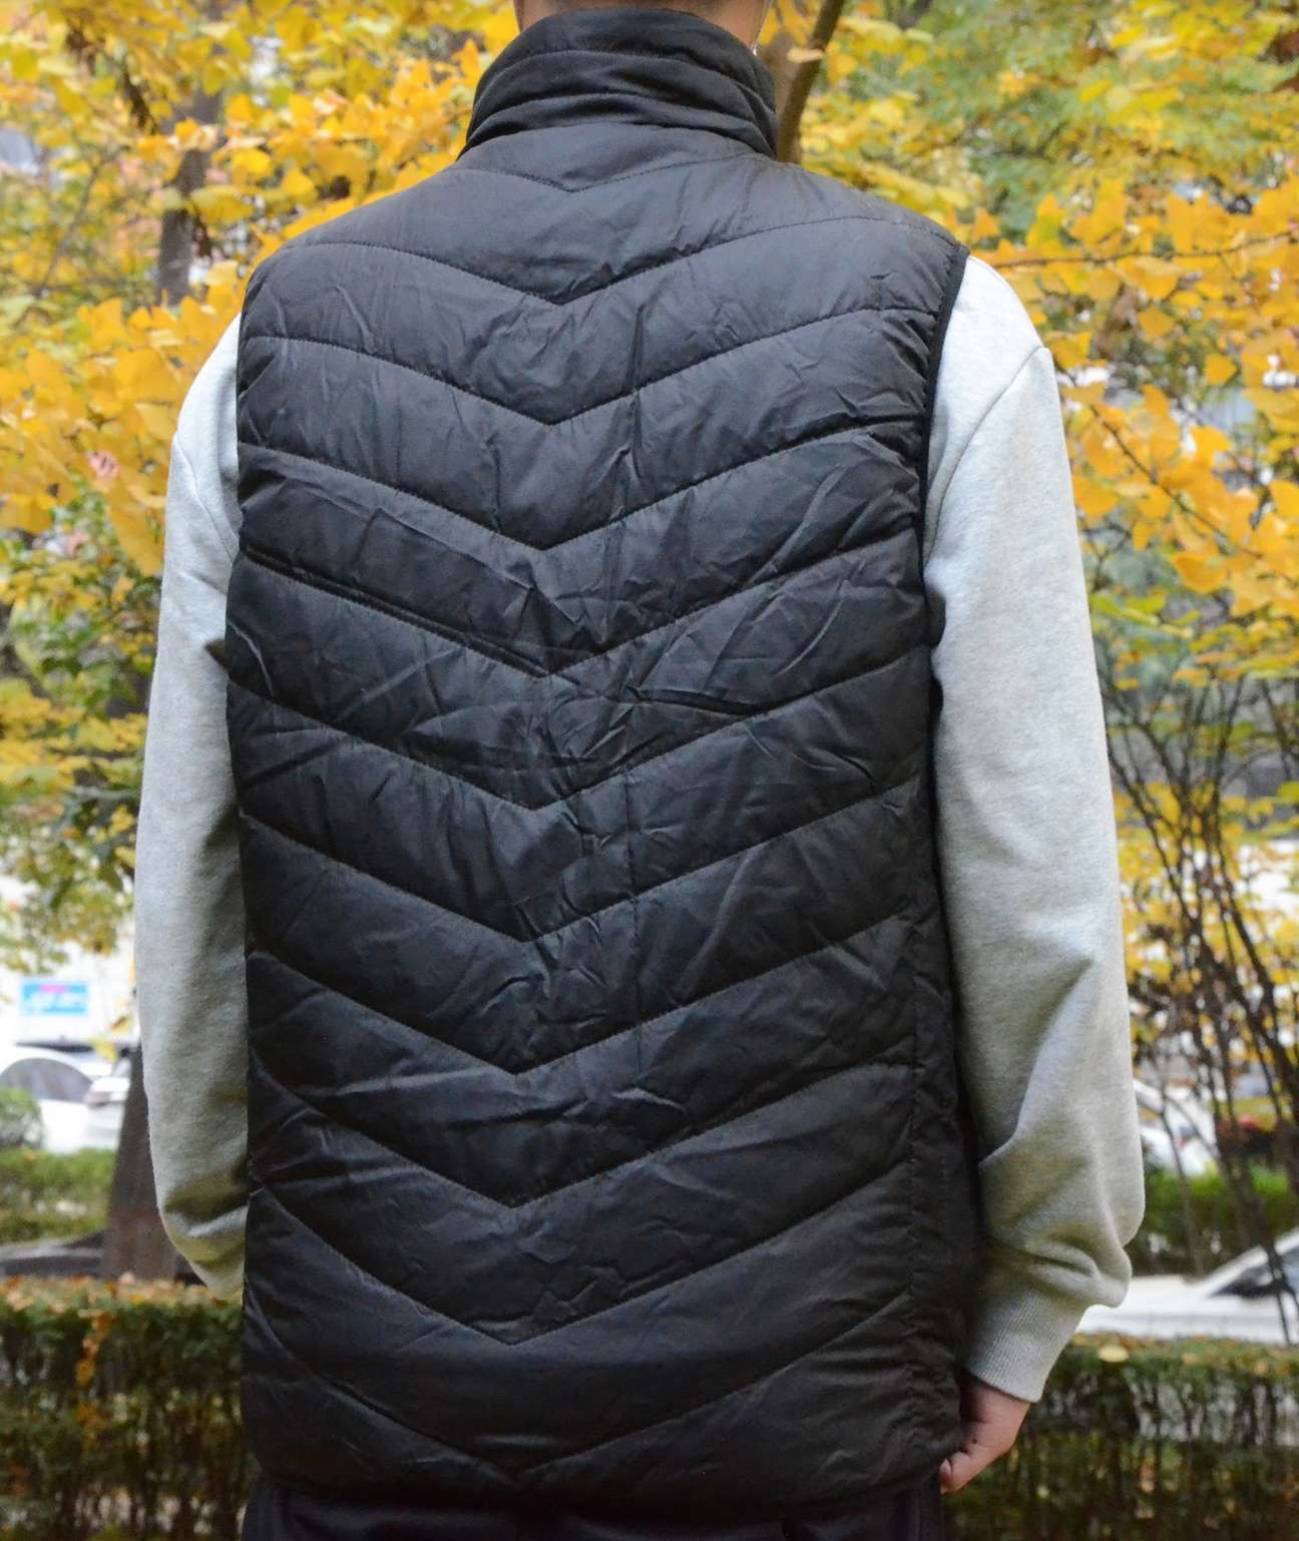 Heated Vest Where To Buy